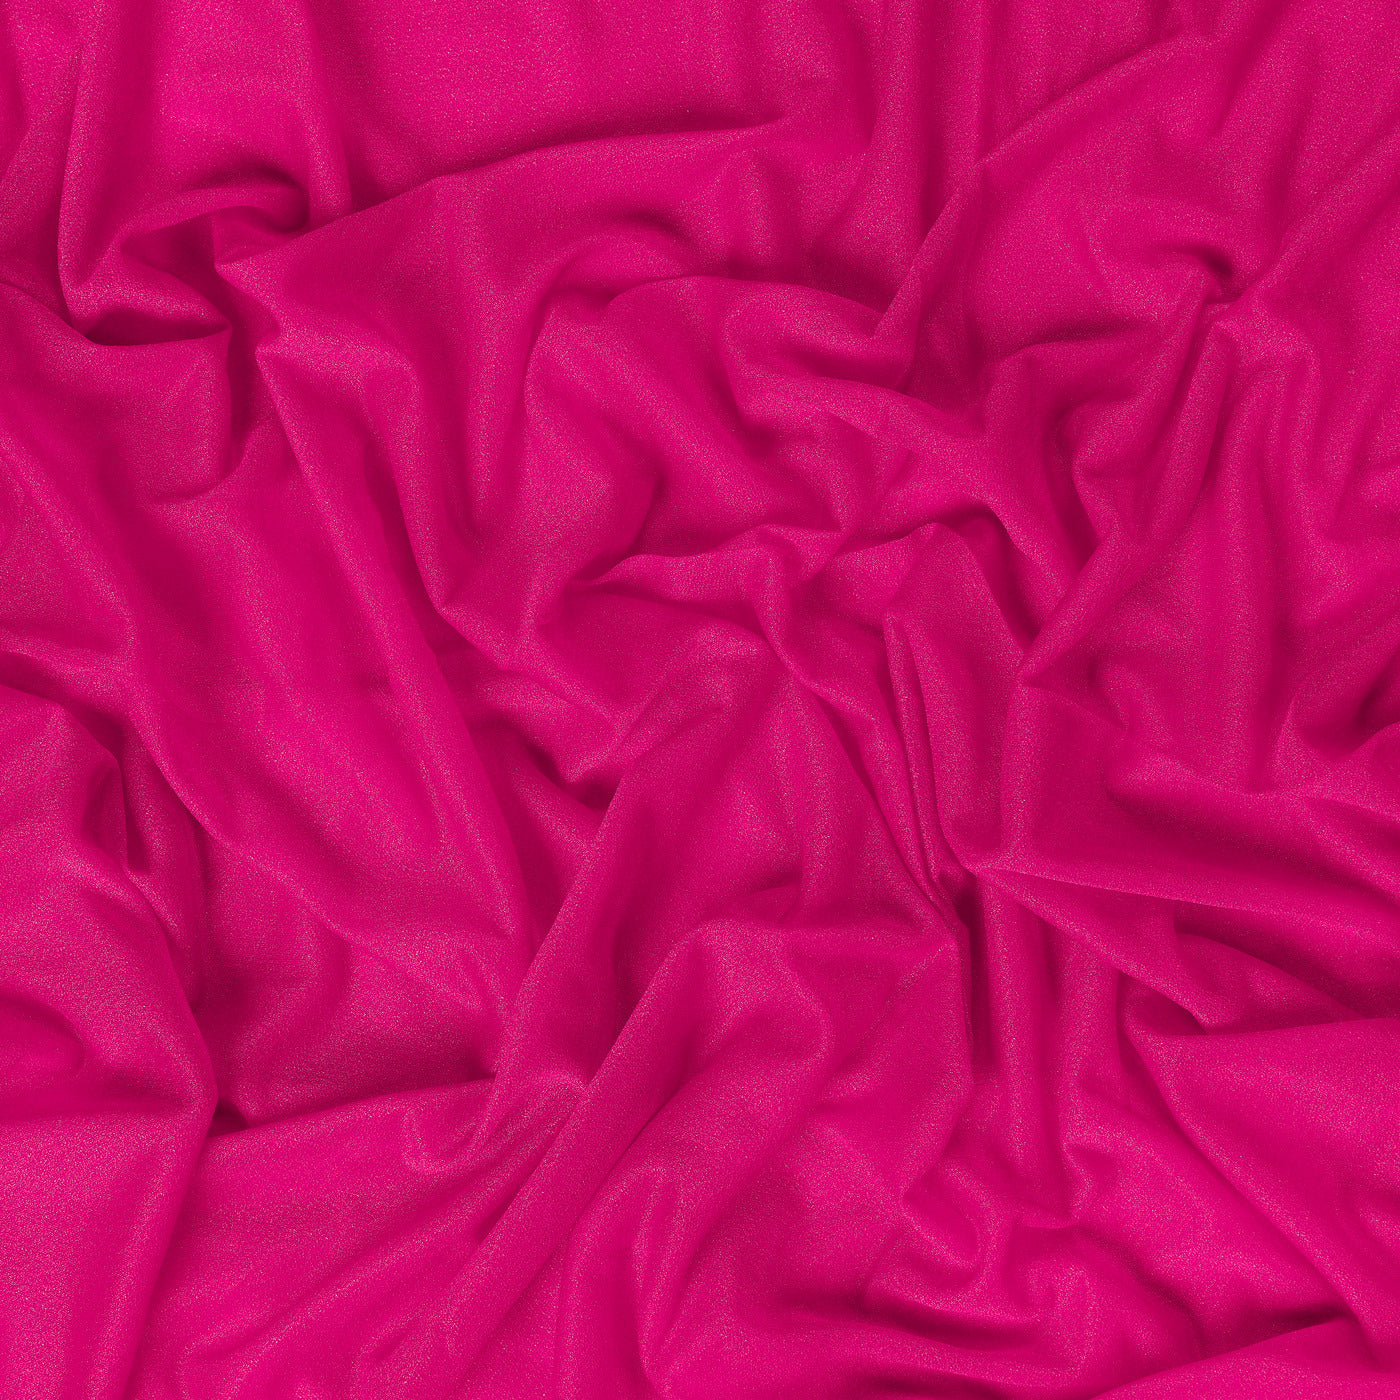 Hot Pink,83fc5292-aae4-4d5e-85fe-6cced24bd854